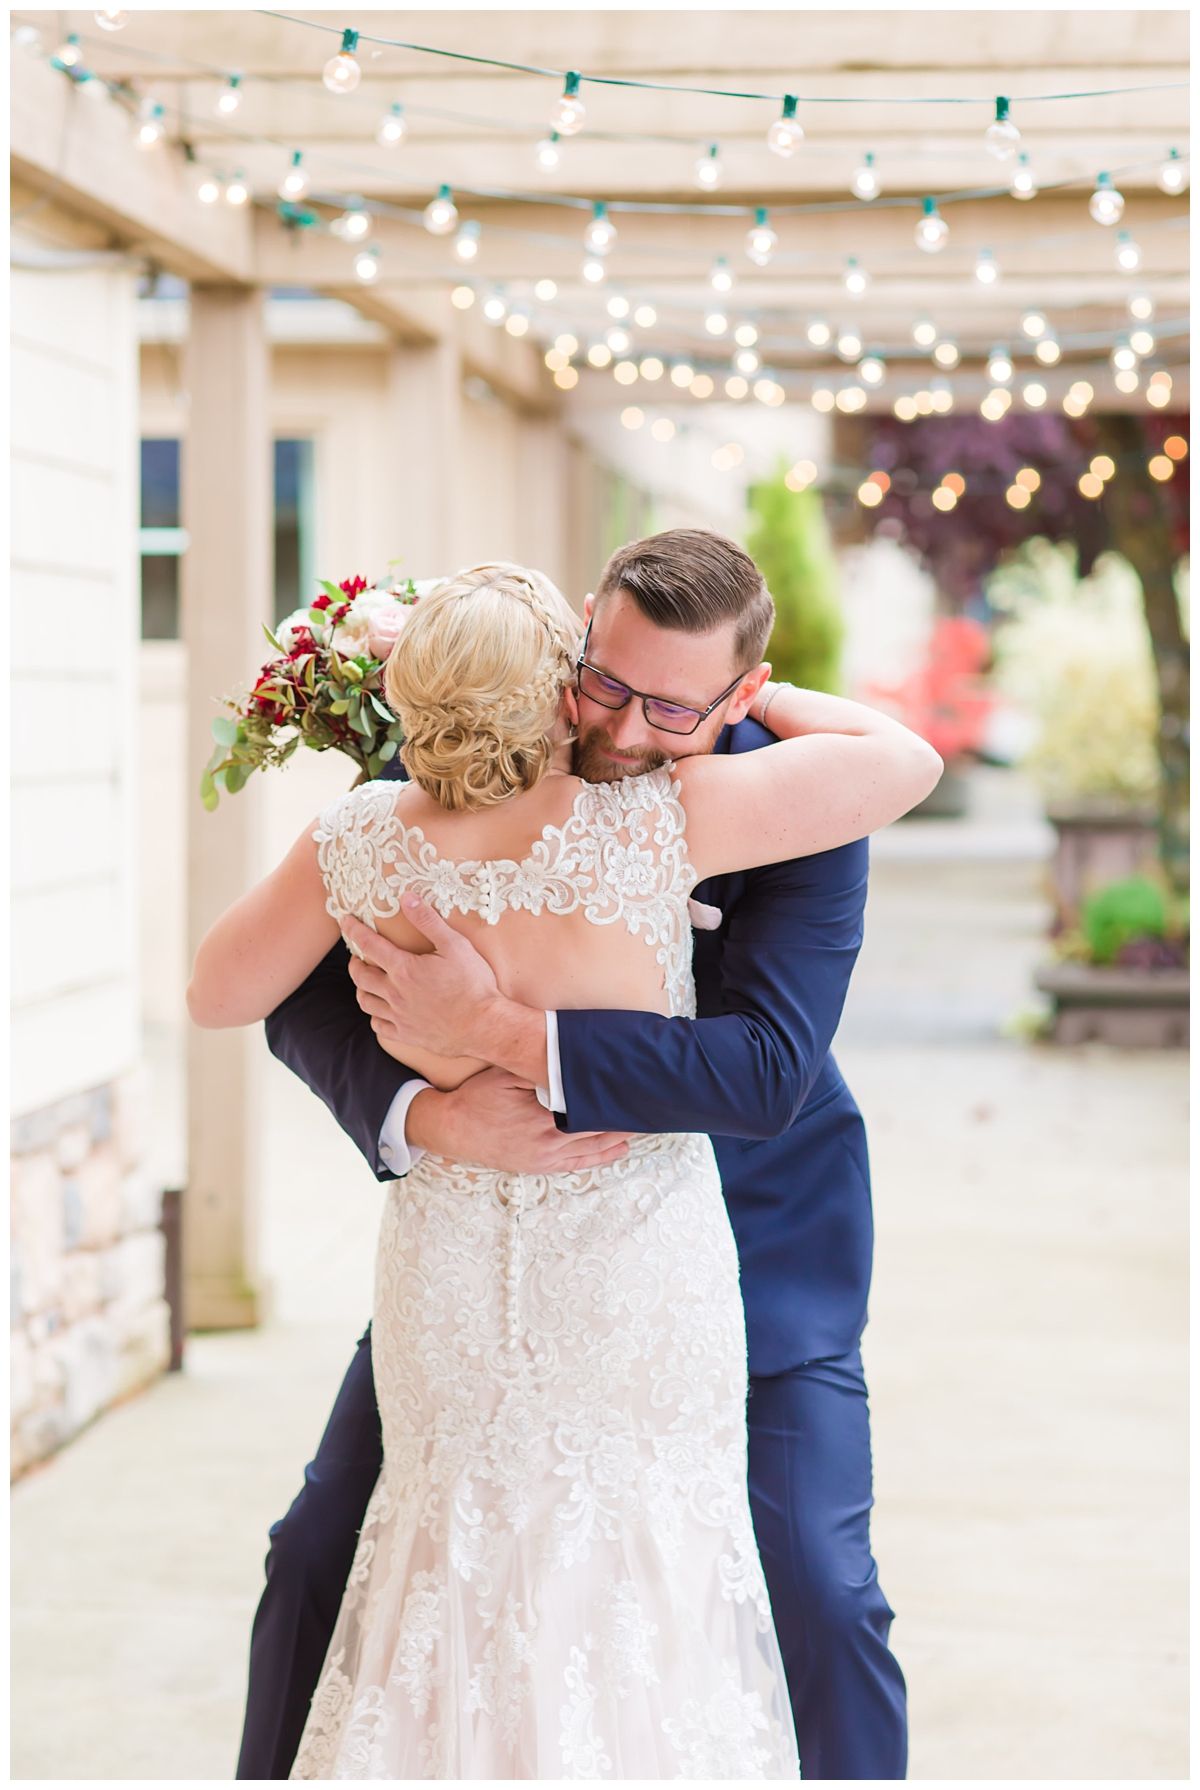 Lord Hill Farms Wedding in Snohomish